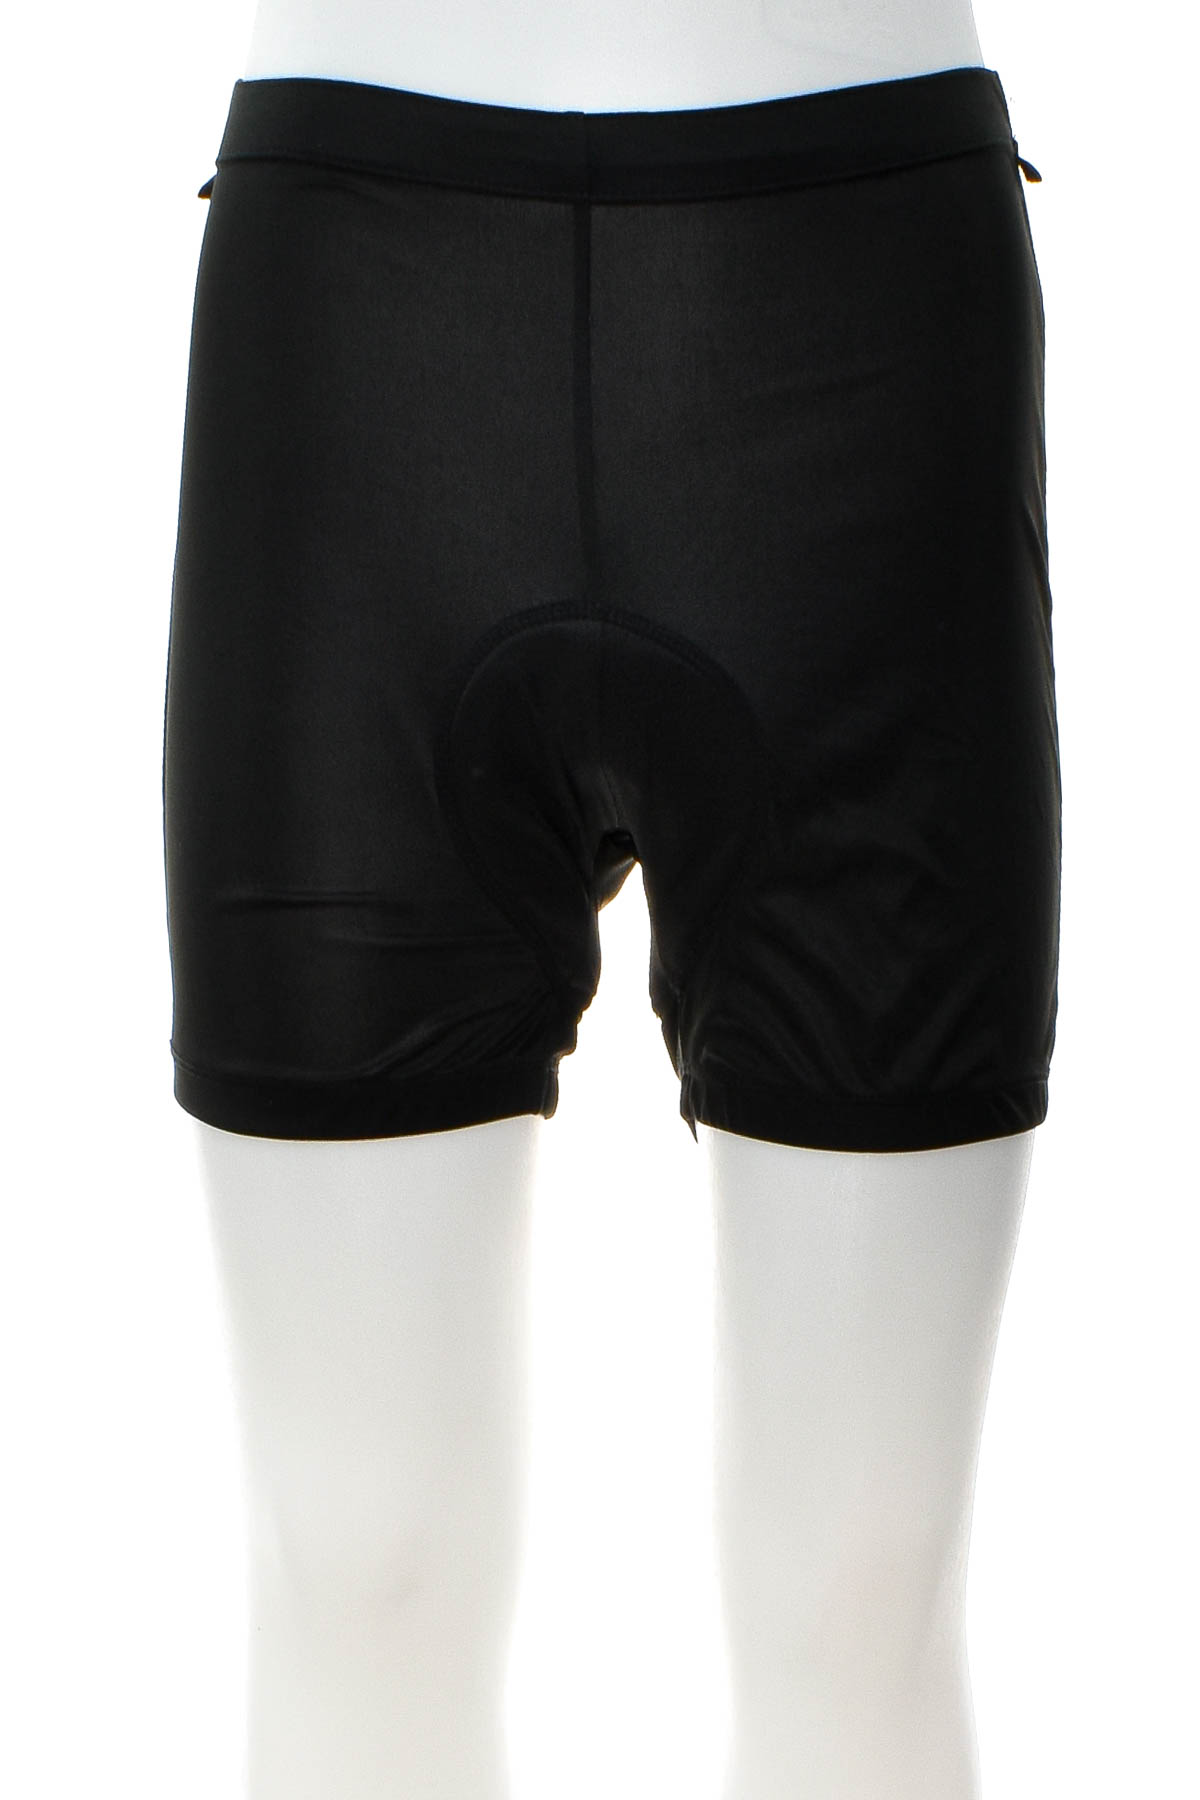 Men's shorts for cycling - Crivit - 0